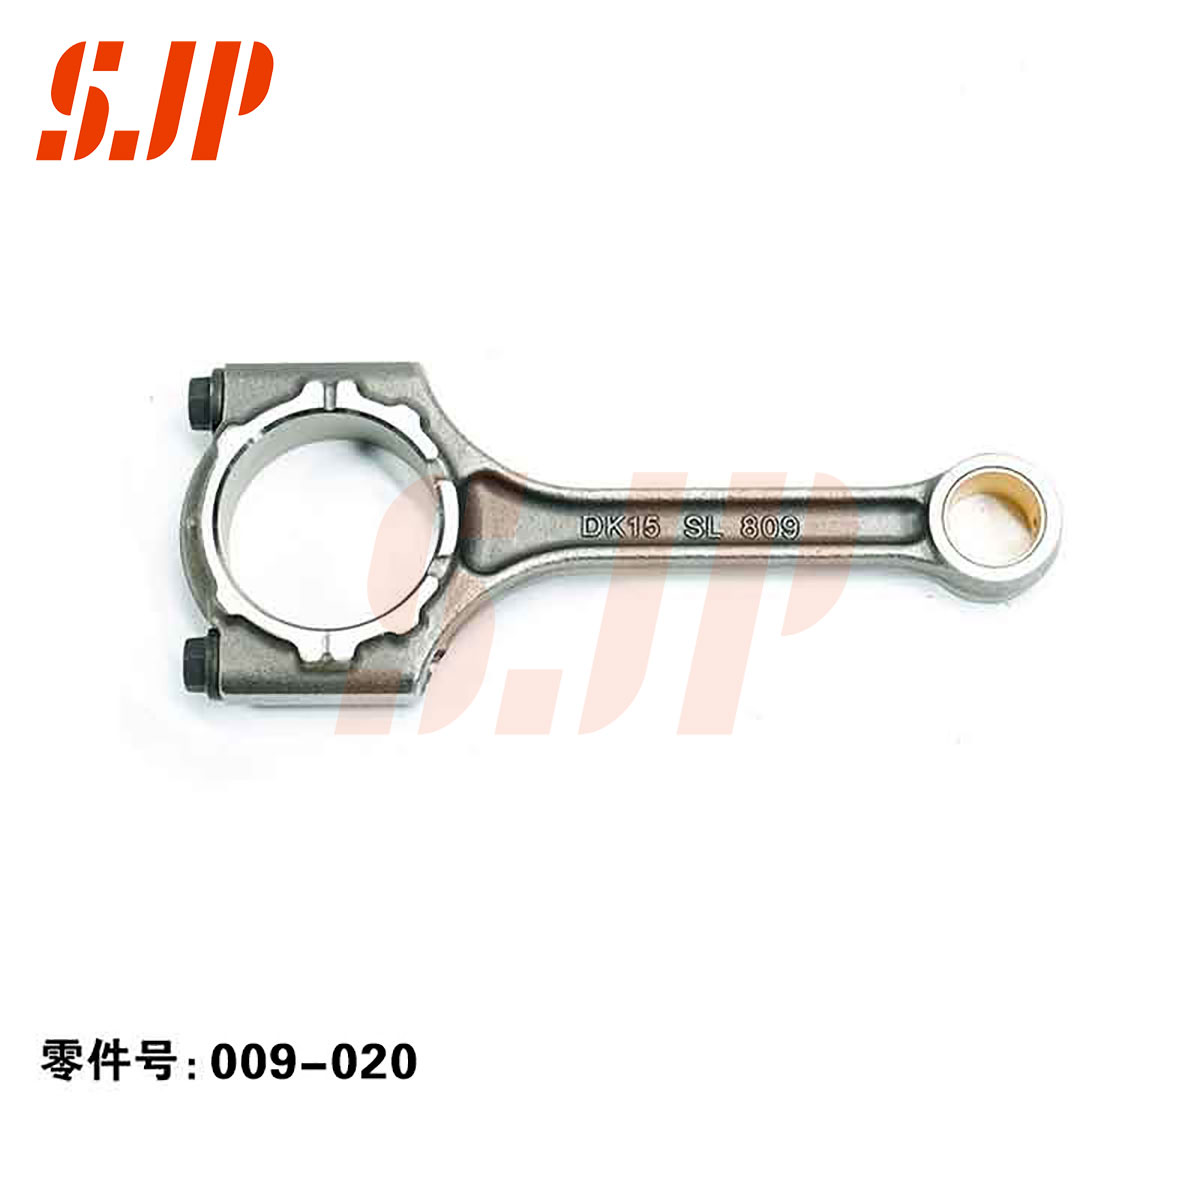 SJ-009-020 Connecting Rod For DK15